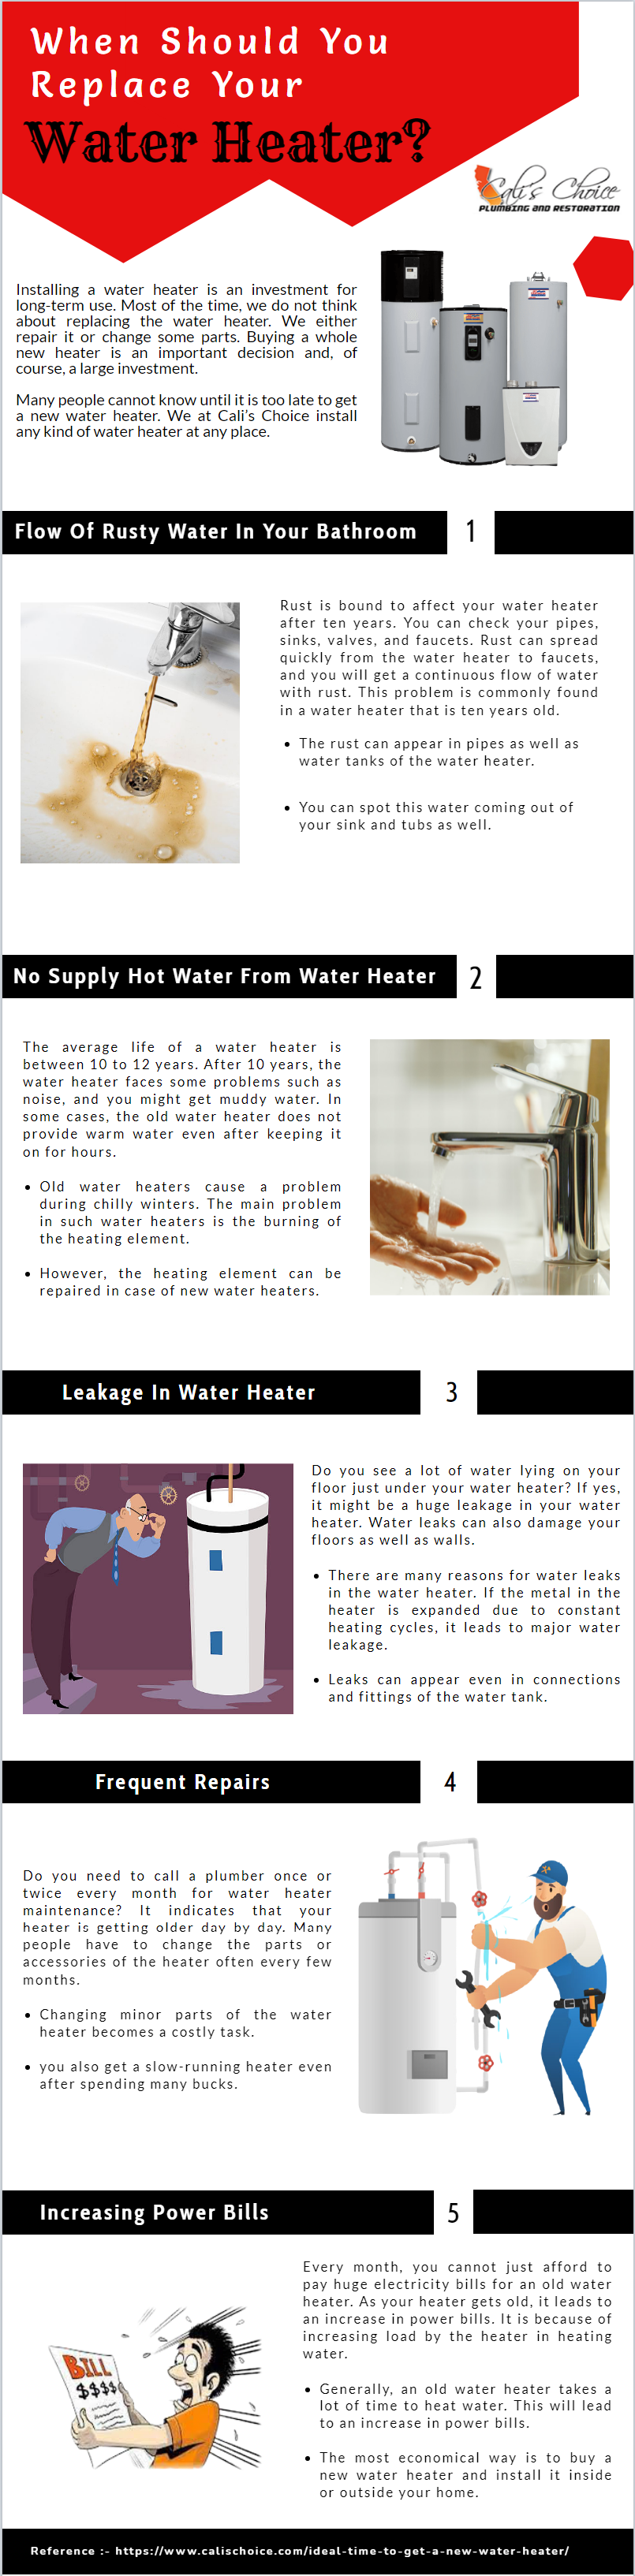 Tips to replace your water heater